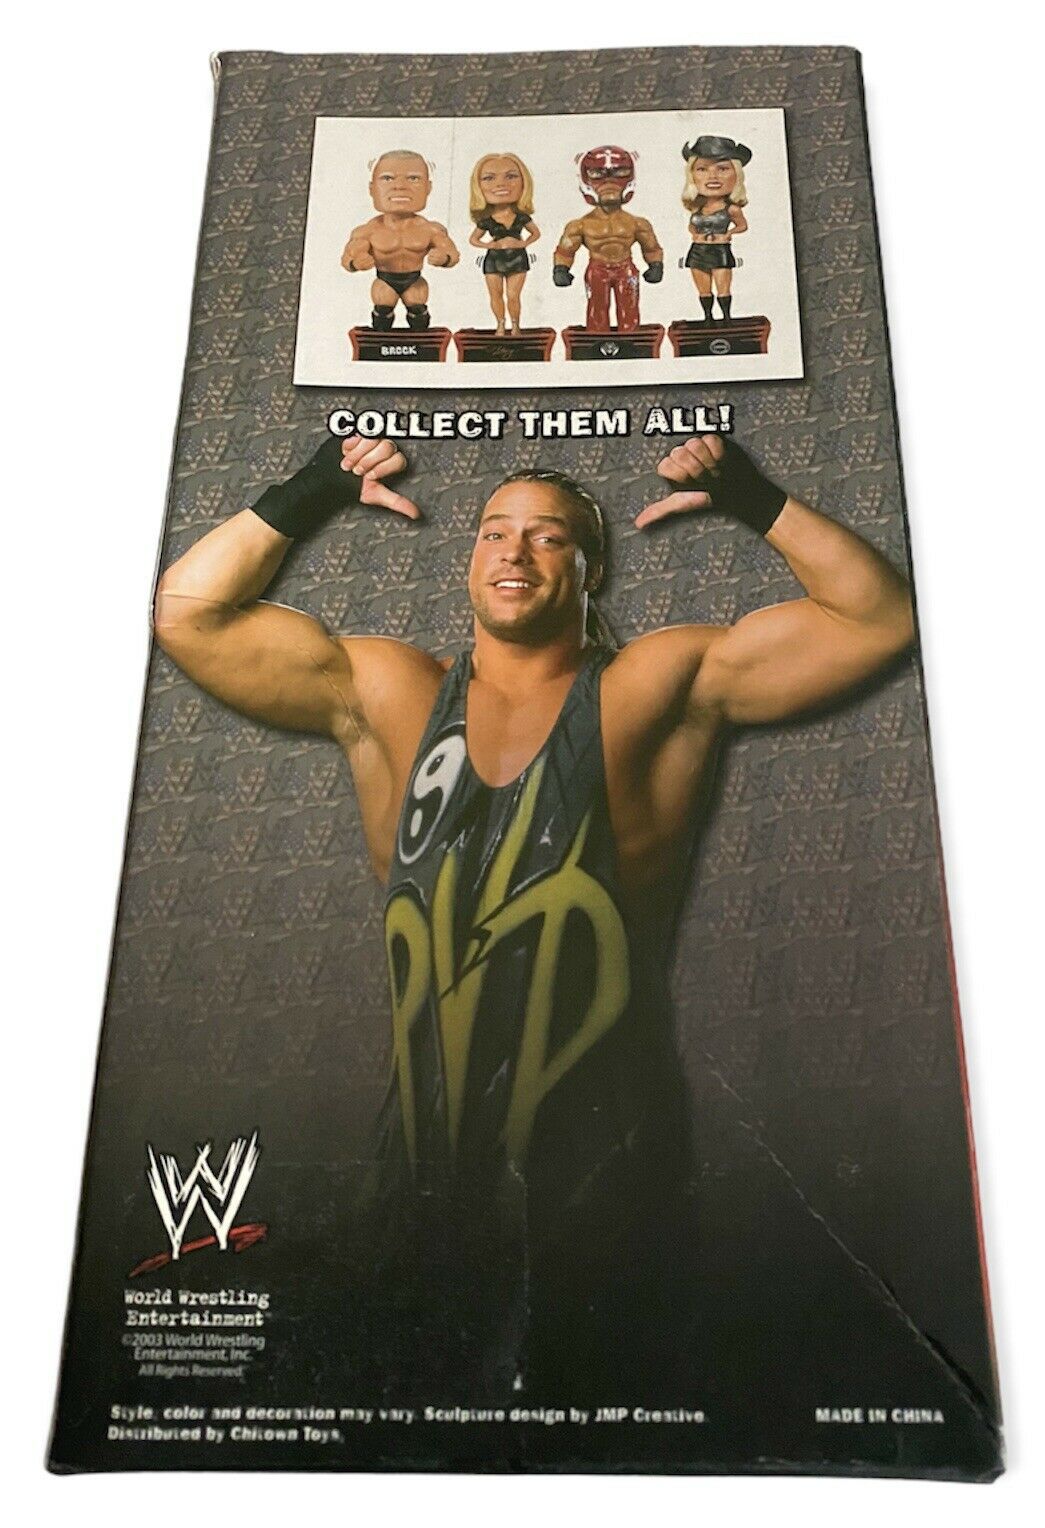 2003 WWE Chitown Toys Collector's Edition Superstars BobbleHeads RVD